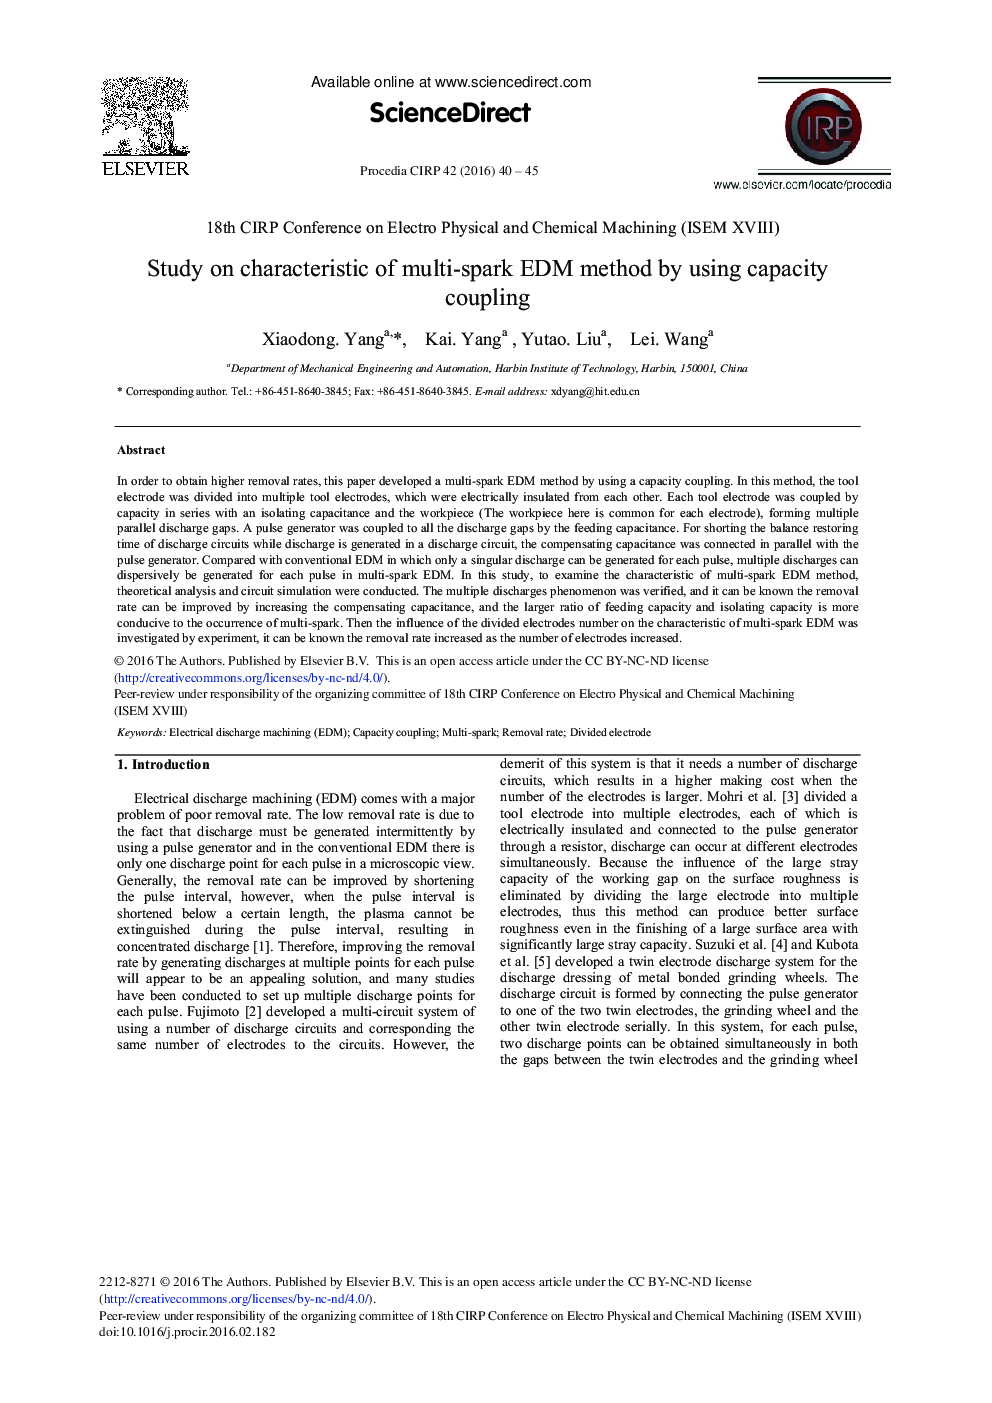 Study on Characteristic of Multi-spark EDM Method by Using Capacity Coupling 